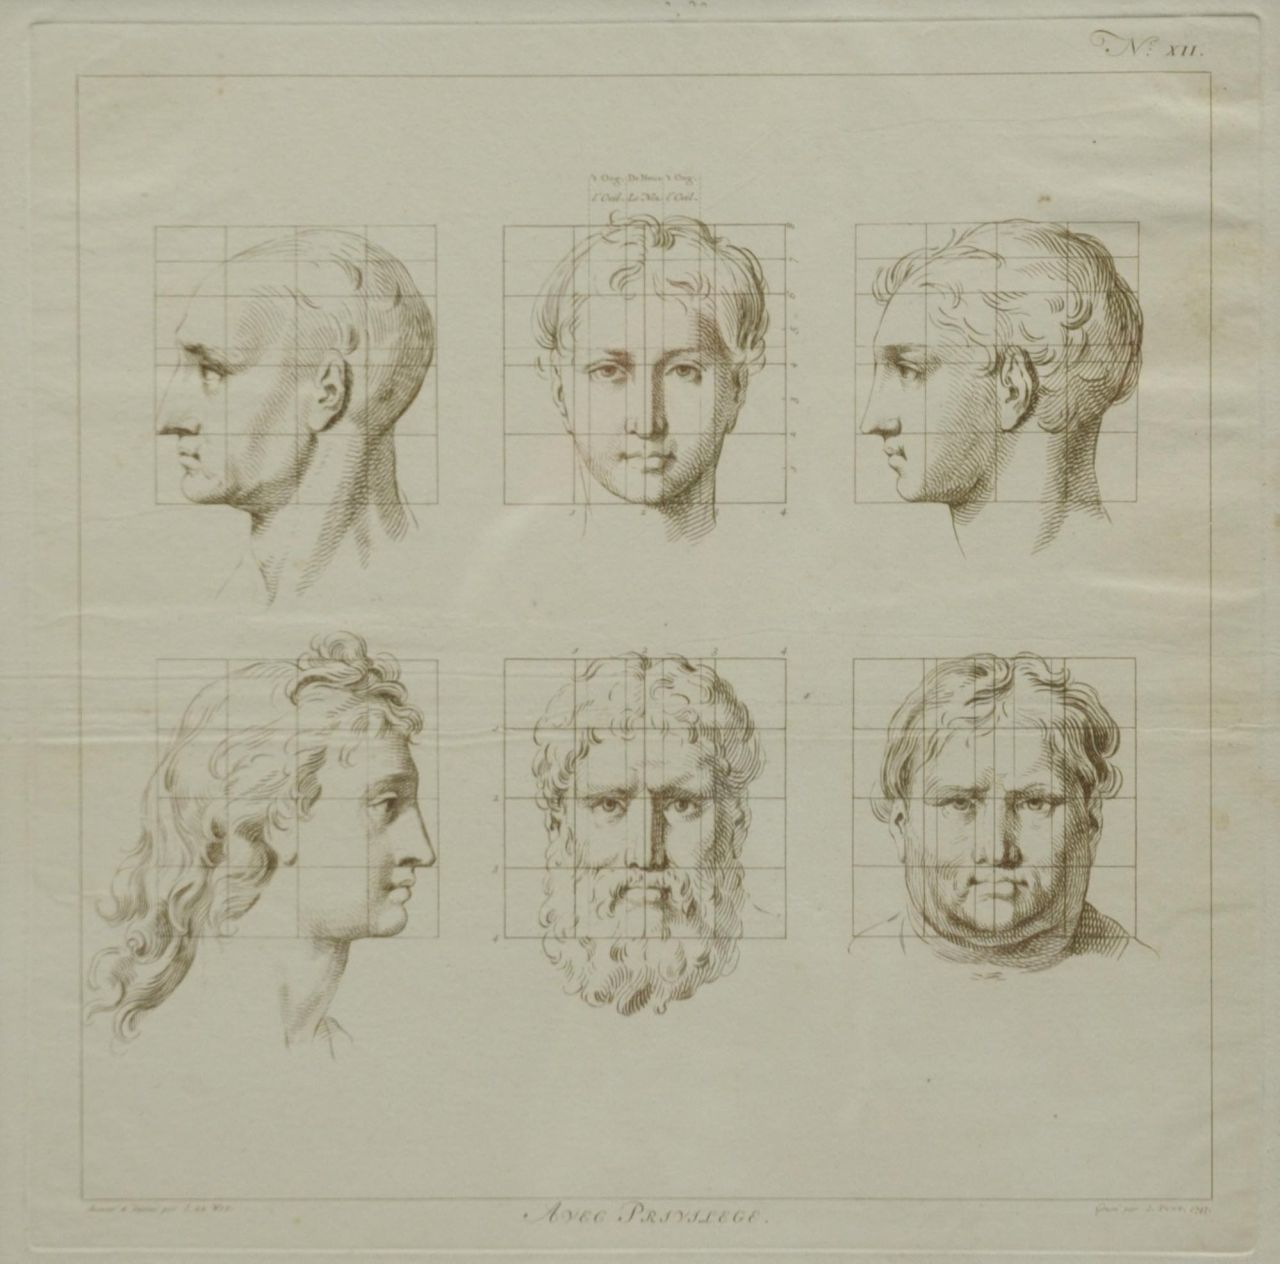 Wit J. de | Jacob de Wit, The ideal proportions of the human body - Head of a man  (no.XII), etching on paper 40.0 x 40.0 cm